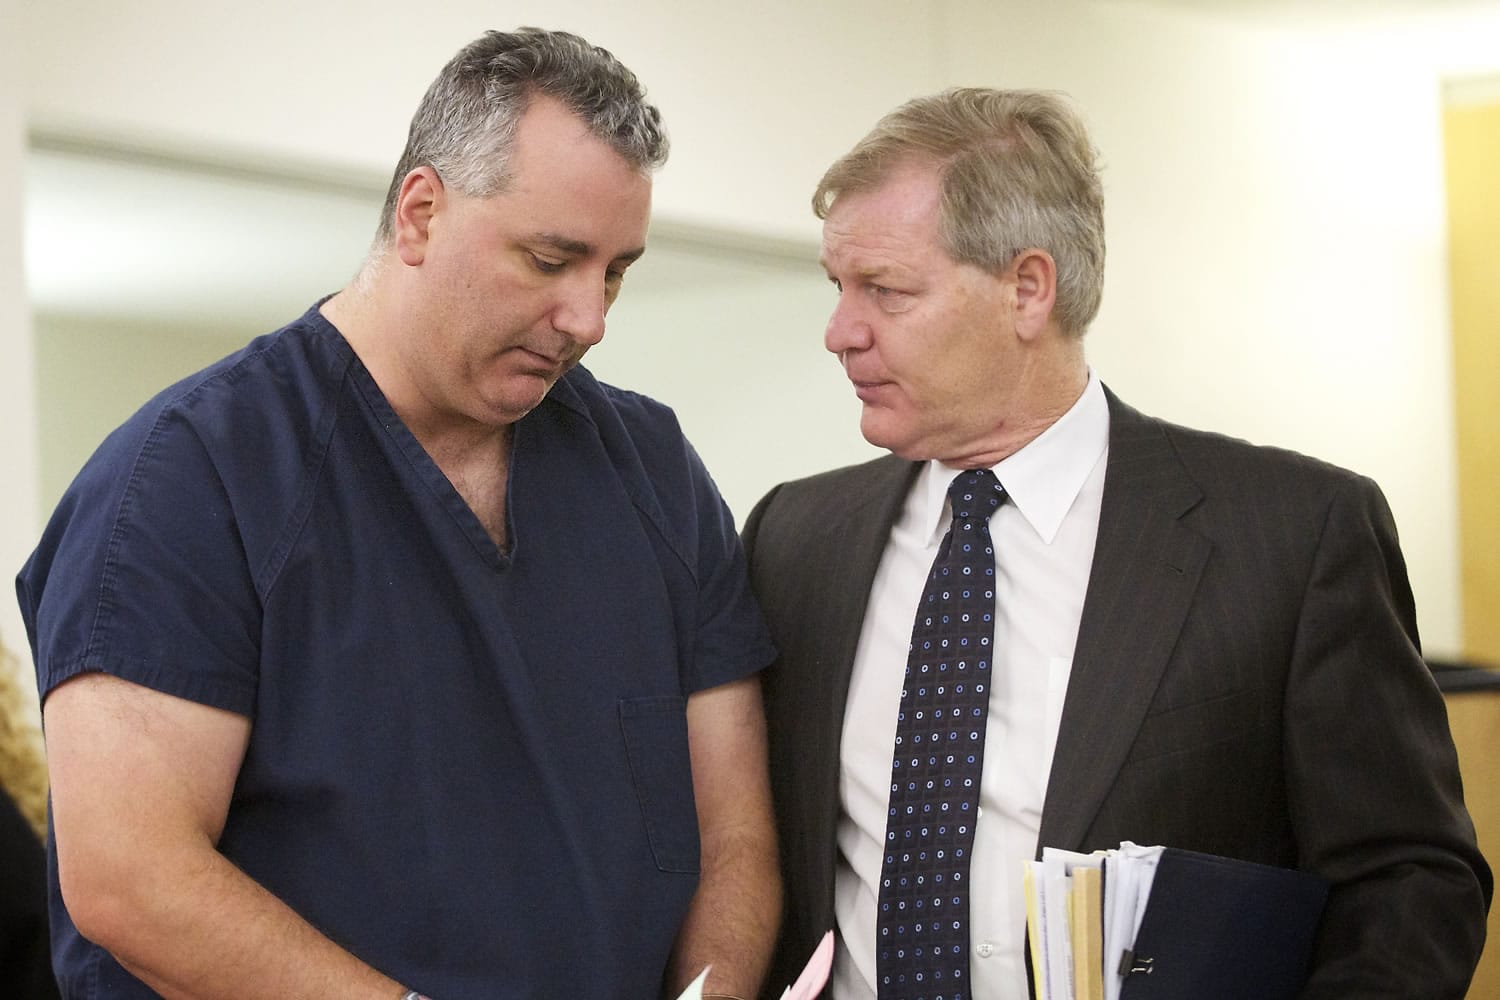 Steven P. Hyson, left, speaks with his attorney, Thomas Phelan, Friday May 4, 2012 at arraignment court in Vancouver, Washington. Hyson is accused of assaulting his 22-year-old stepson on Tuesday, according to a news release from the Clackamas County, Ore. sheriffis office.